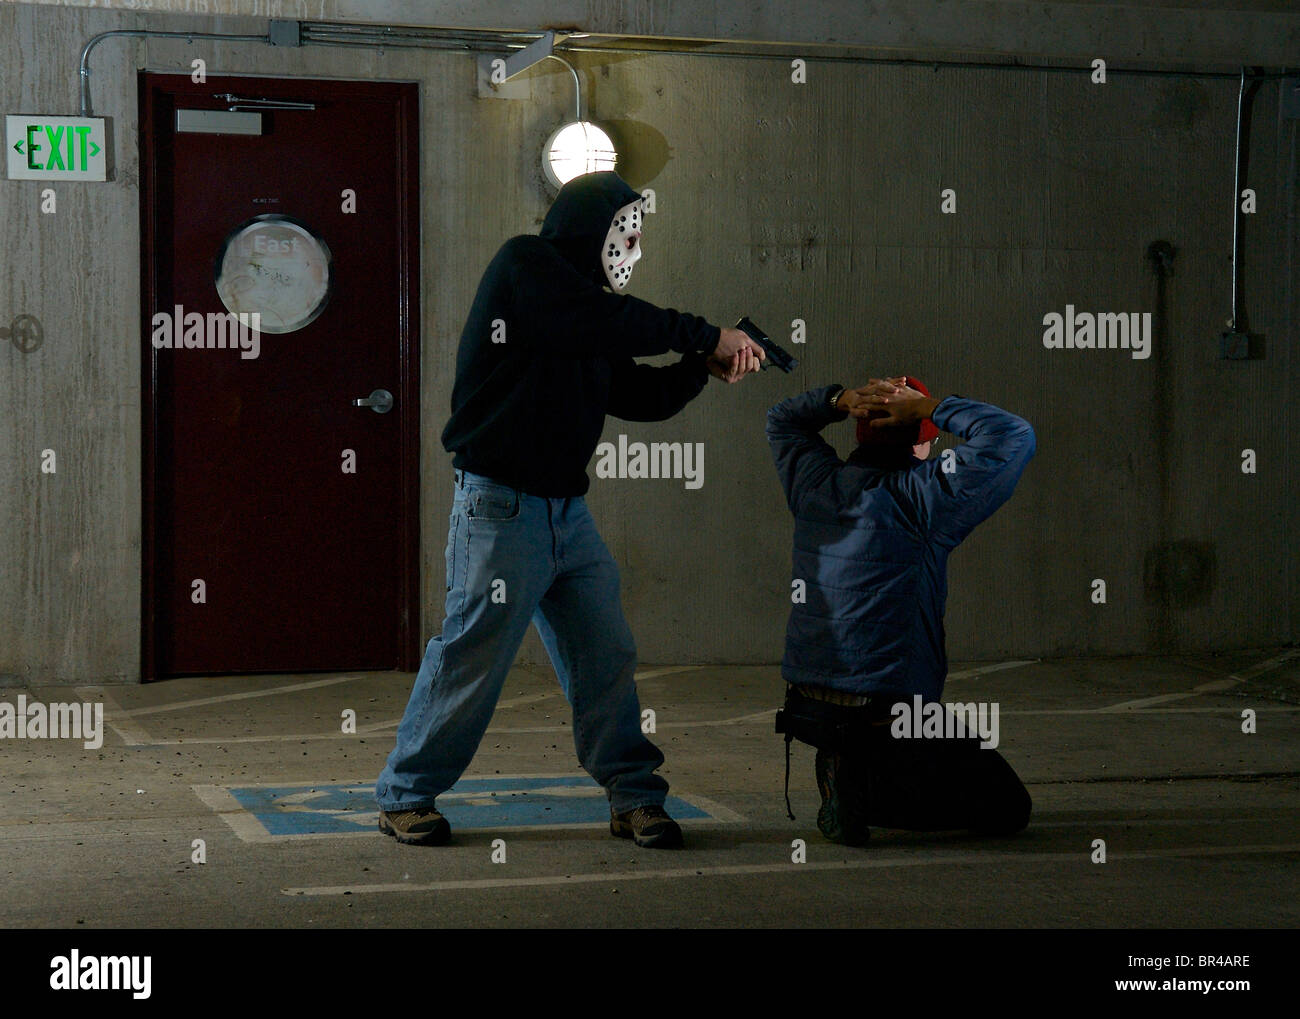 A man being robbed in a parking garage. Stock Photo